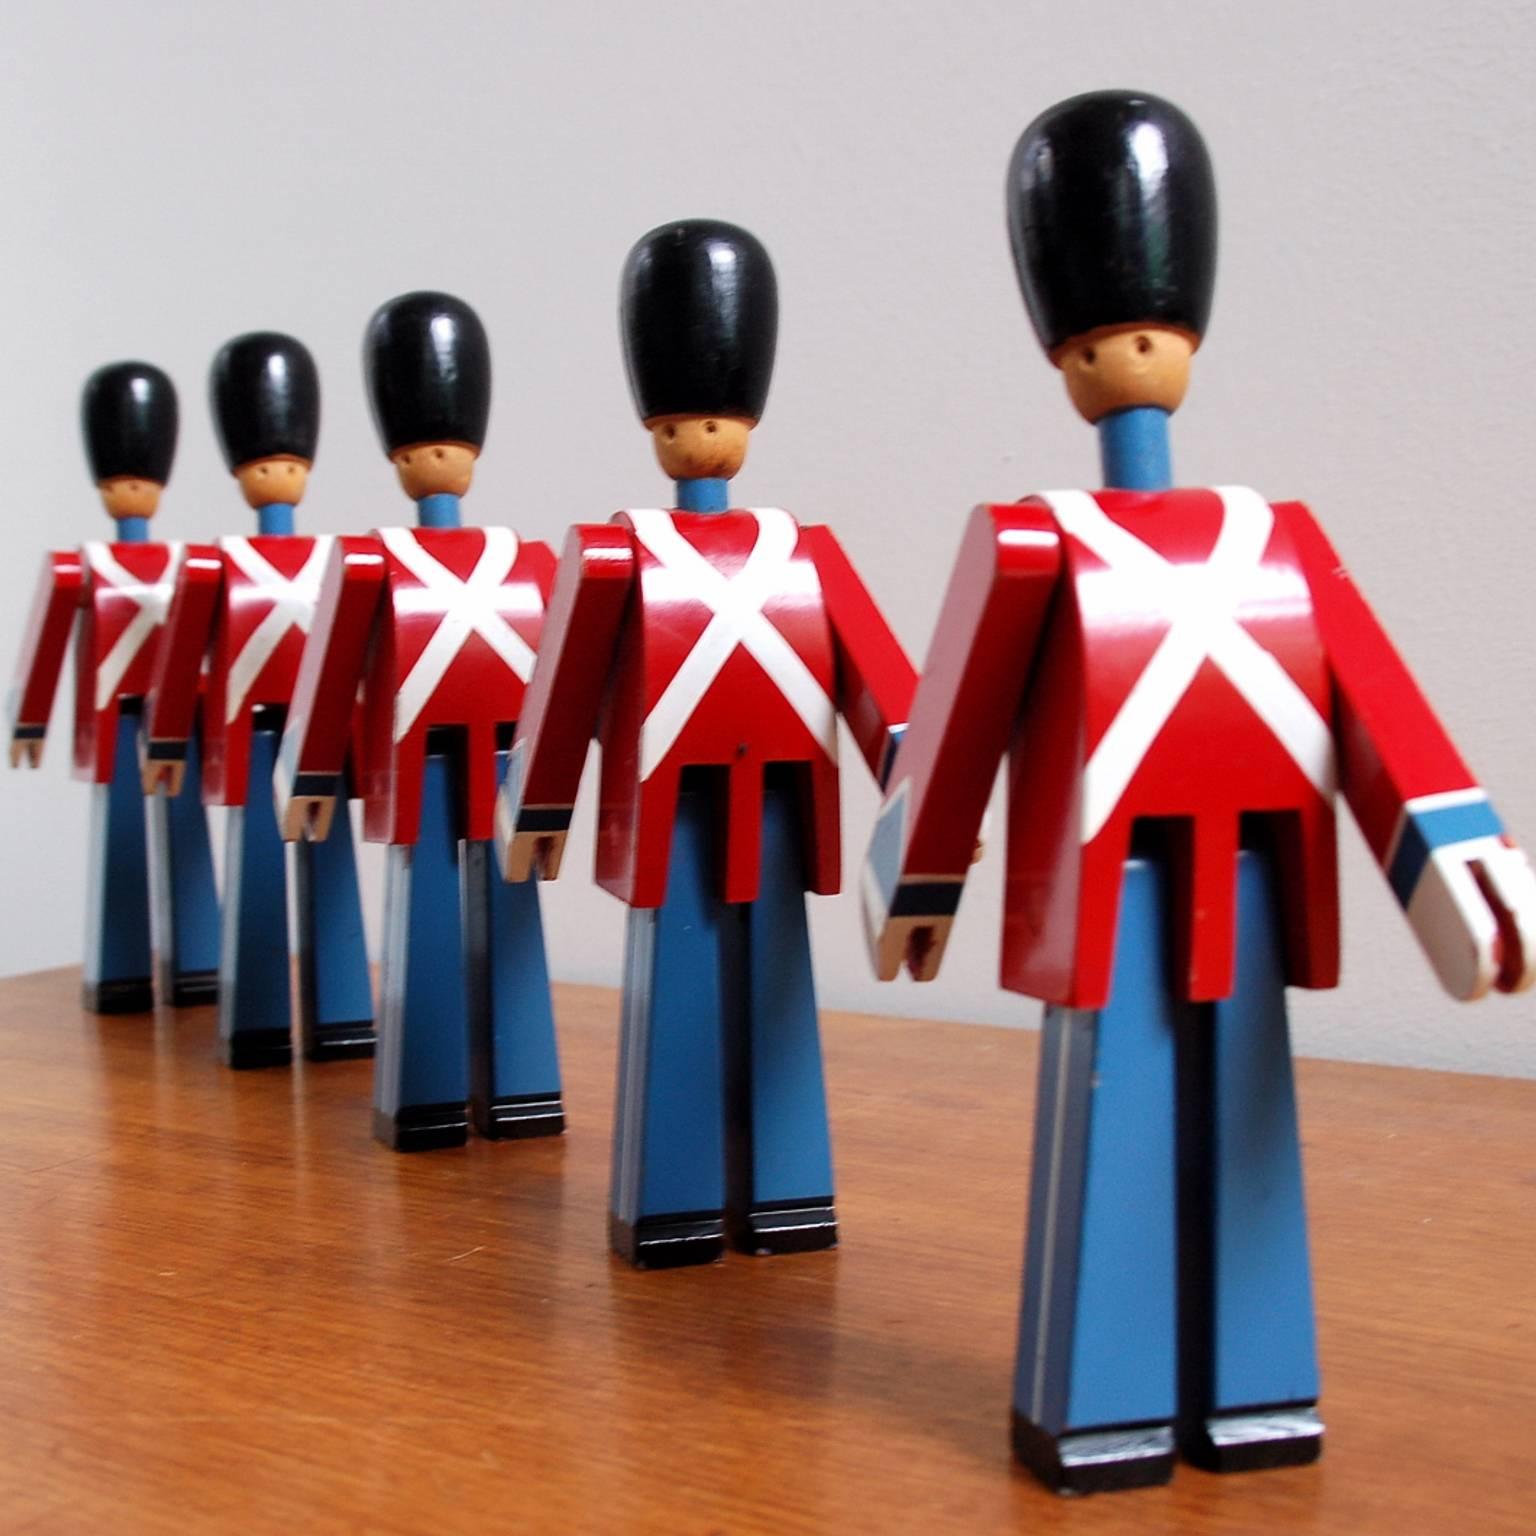 Set of five toy life guards designed in 1940 as a tribute to King Christian the 10th and put into production in 1942. They are Bojesen's interpretation of the traditional Royal Danish life guards.

Price is for the set.